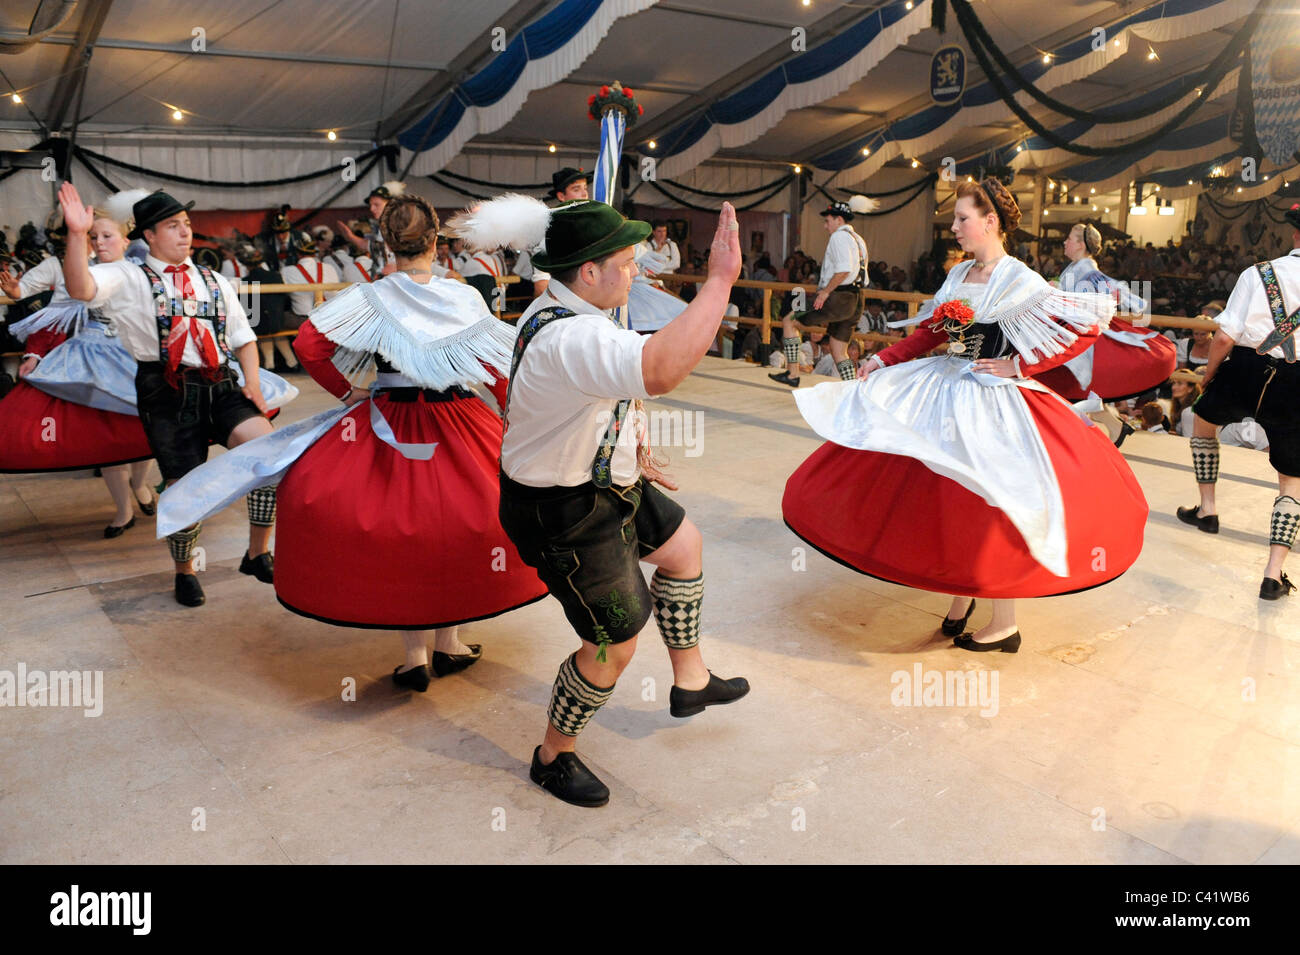 dancer in traditional costumes show the famous dance "Schuhplattler" in Bavaria, Germany Stock Photo